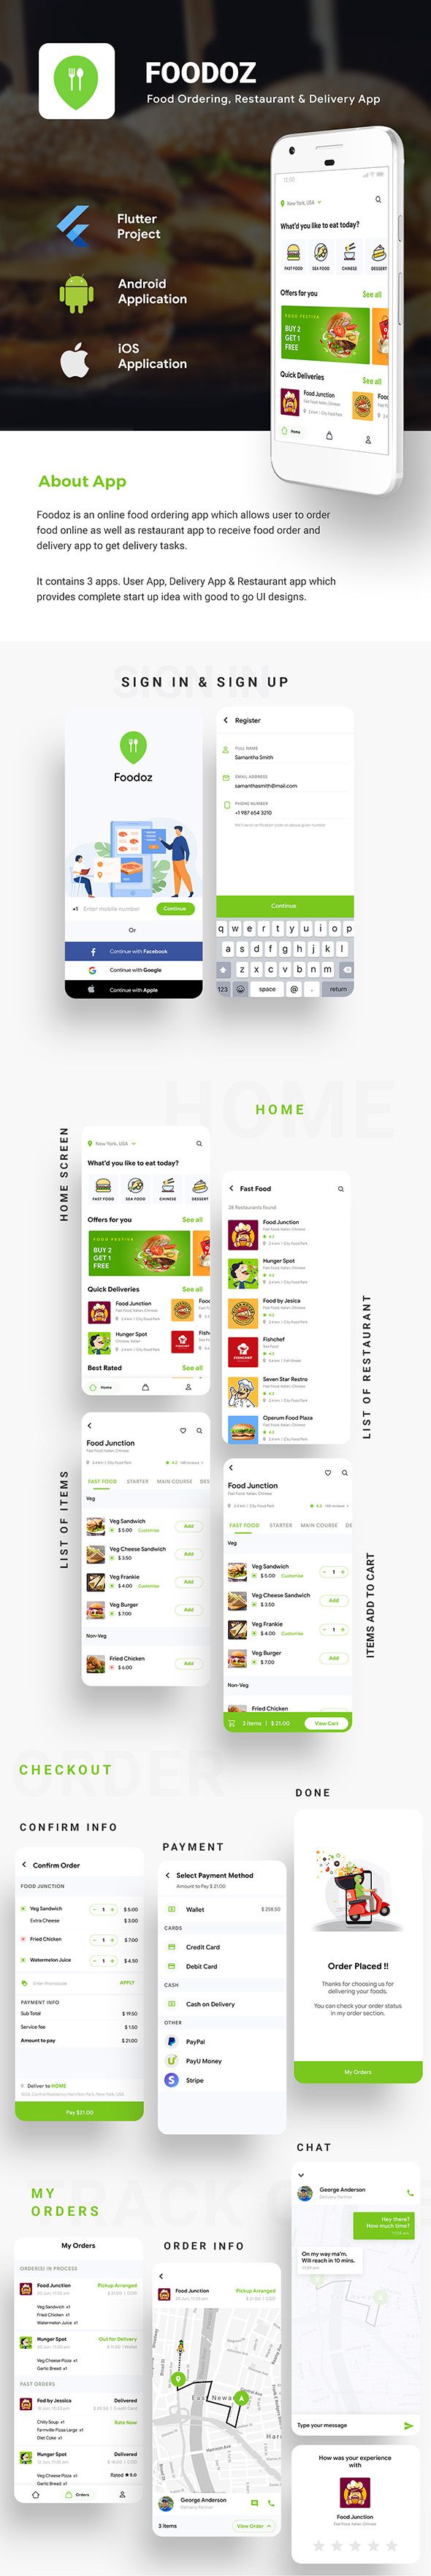 Multi Restaurant Food Ordering App | Food Delivery App | 3 Apps | Android + iOS App Template| Flutte - 2